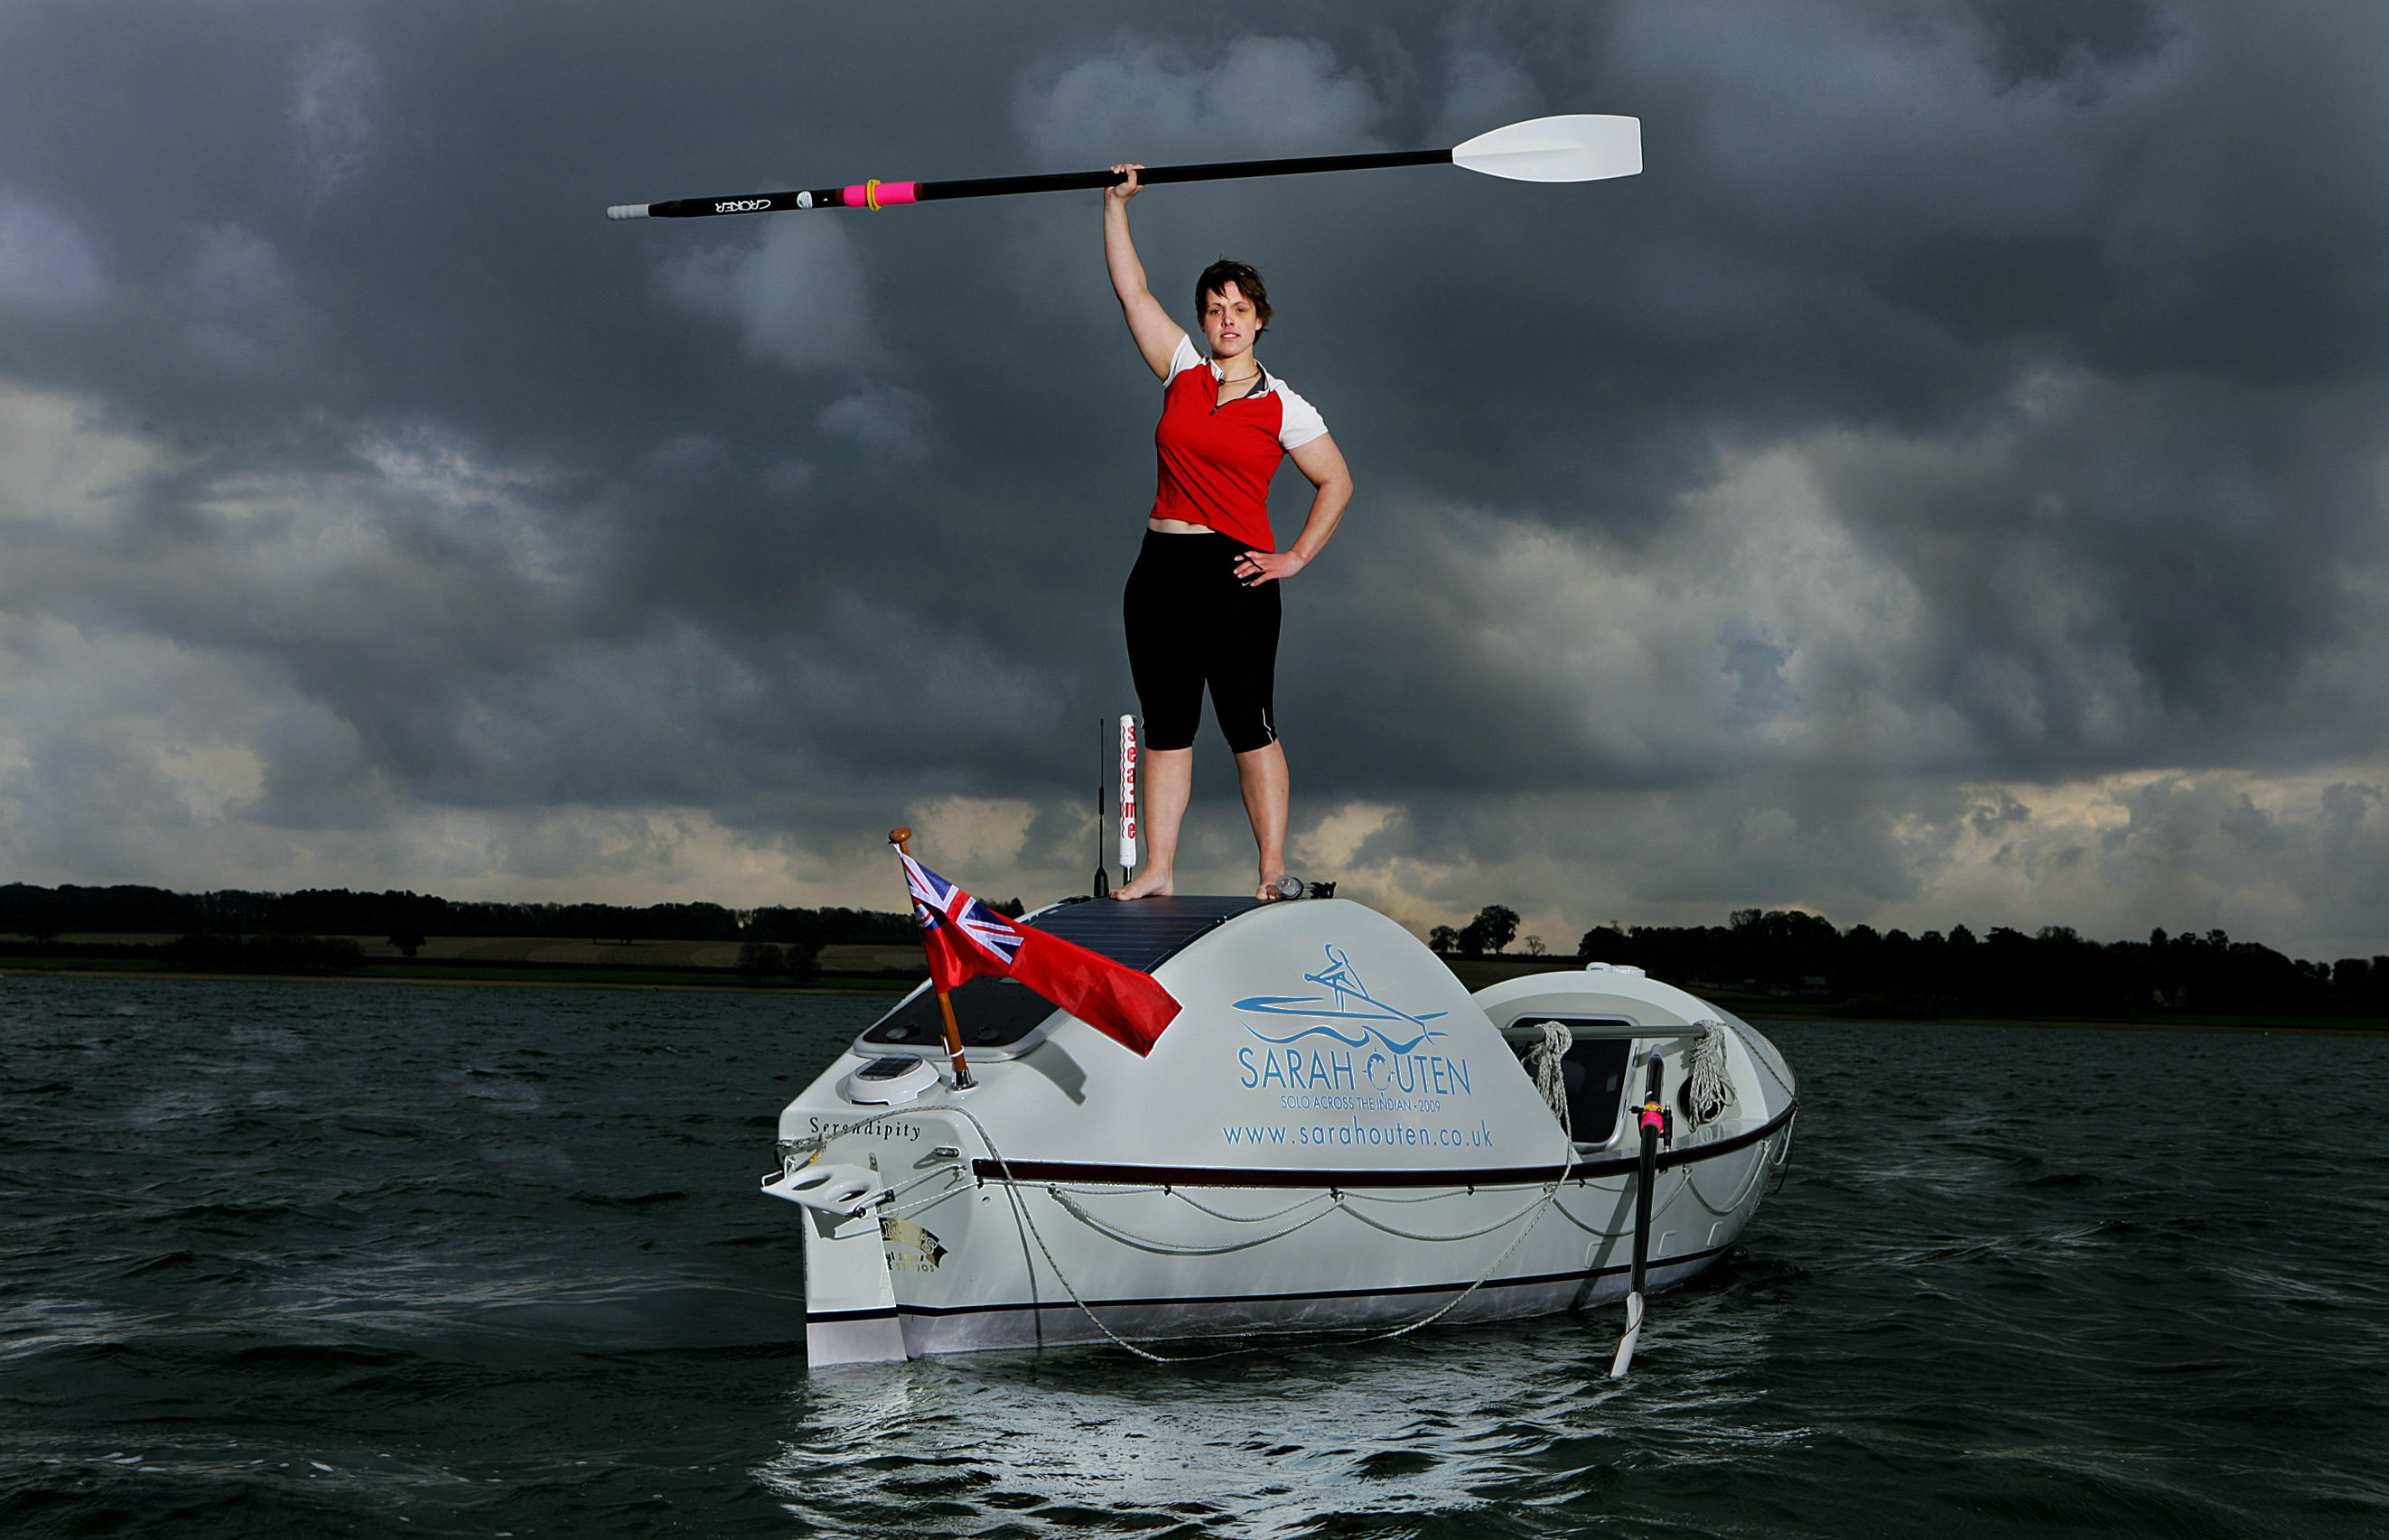 Sarah Outen – cycling, rowing and kayaking around the world!